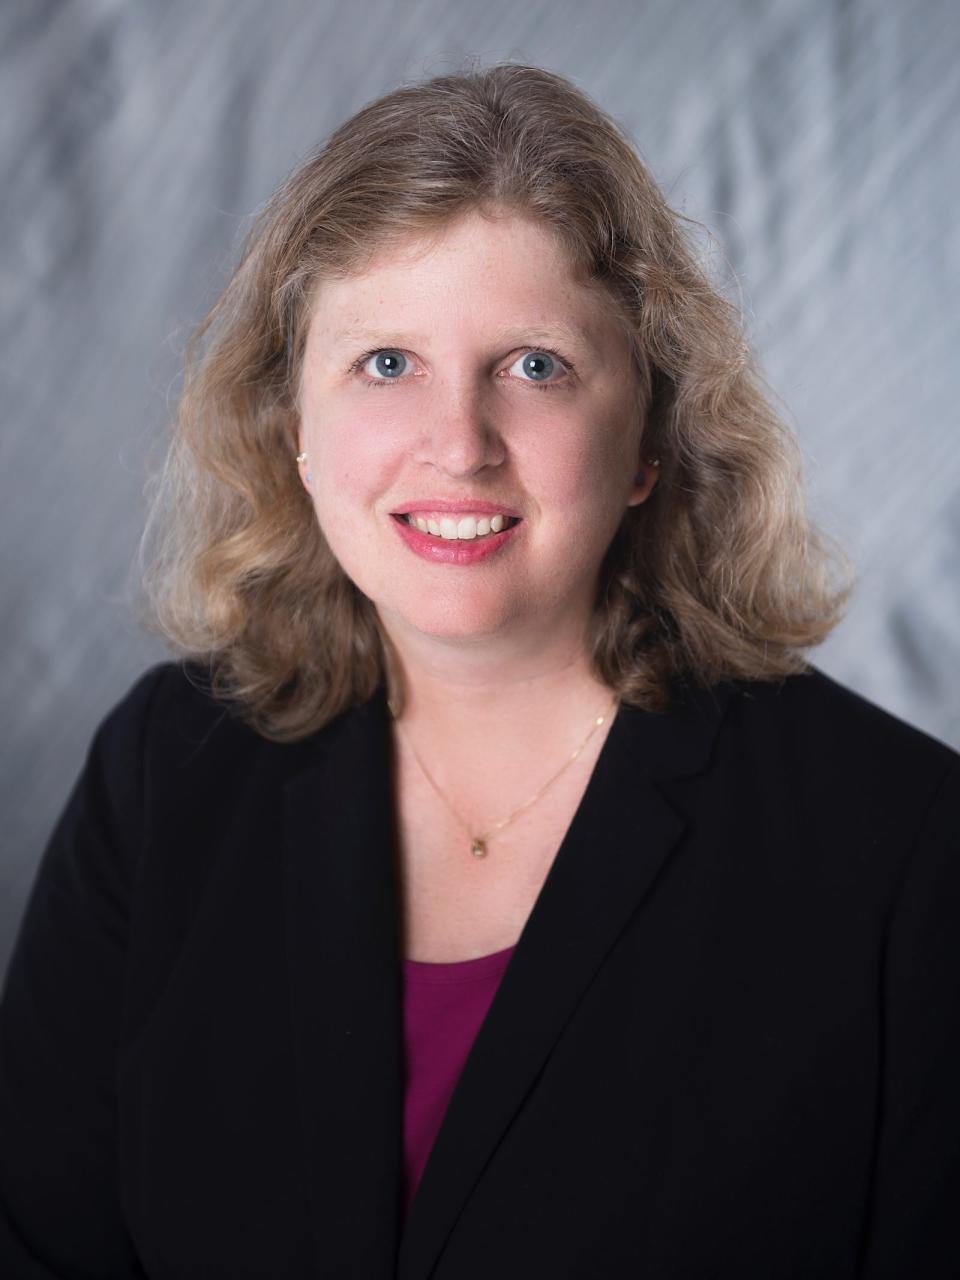 Andrea Milner is vice president and dean of academic affairs at Adrian College.